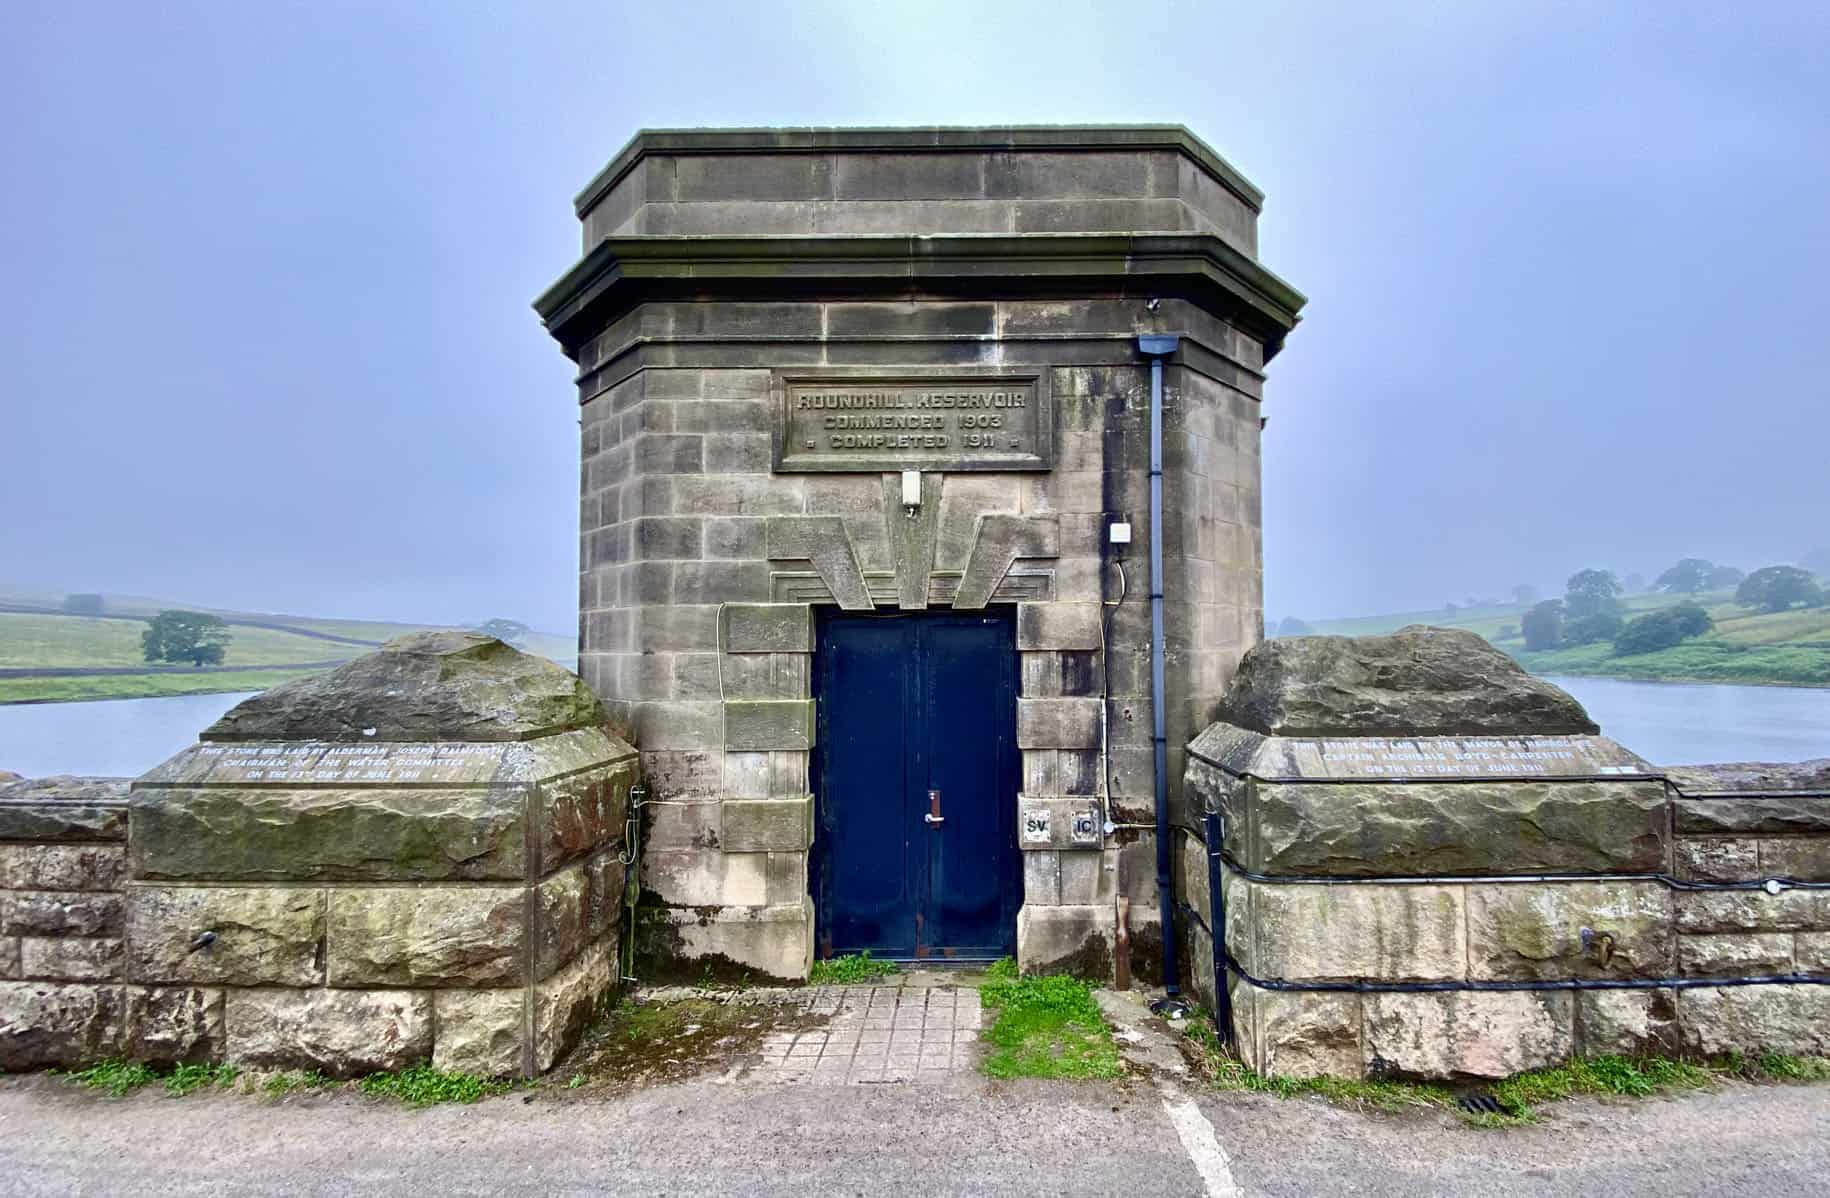 Roundhill Reservoir tower with the inscription:
ROUNDHILL.RESERVOIR
COMMENCED 1903
COMPLETED 1911